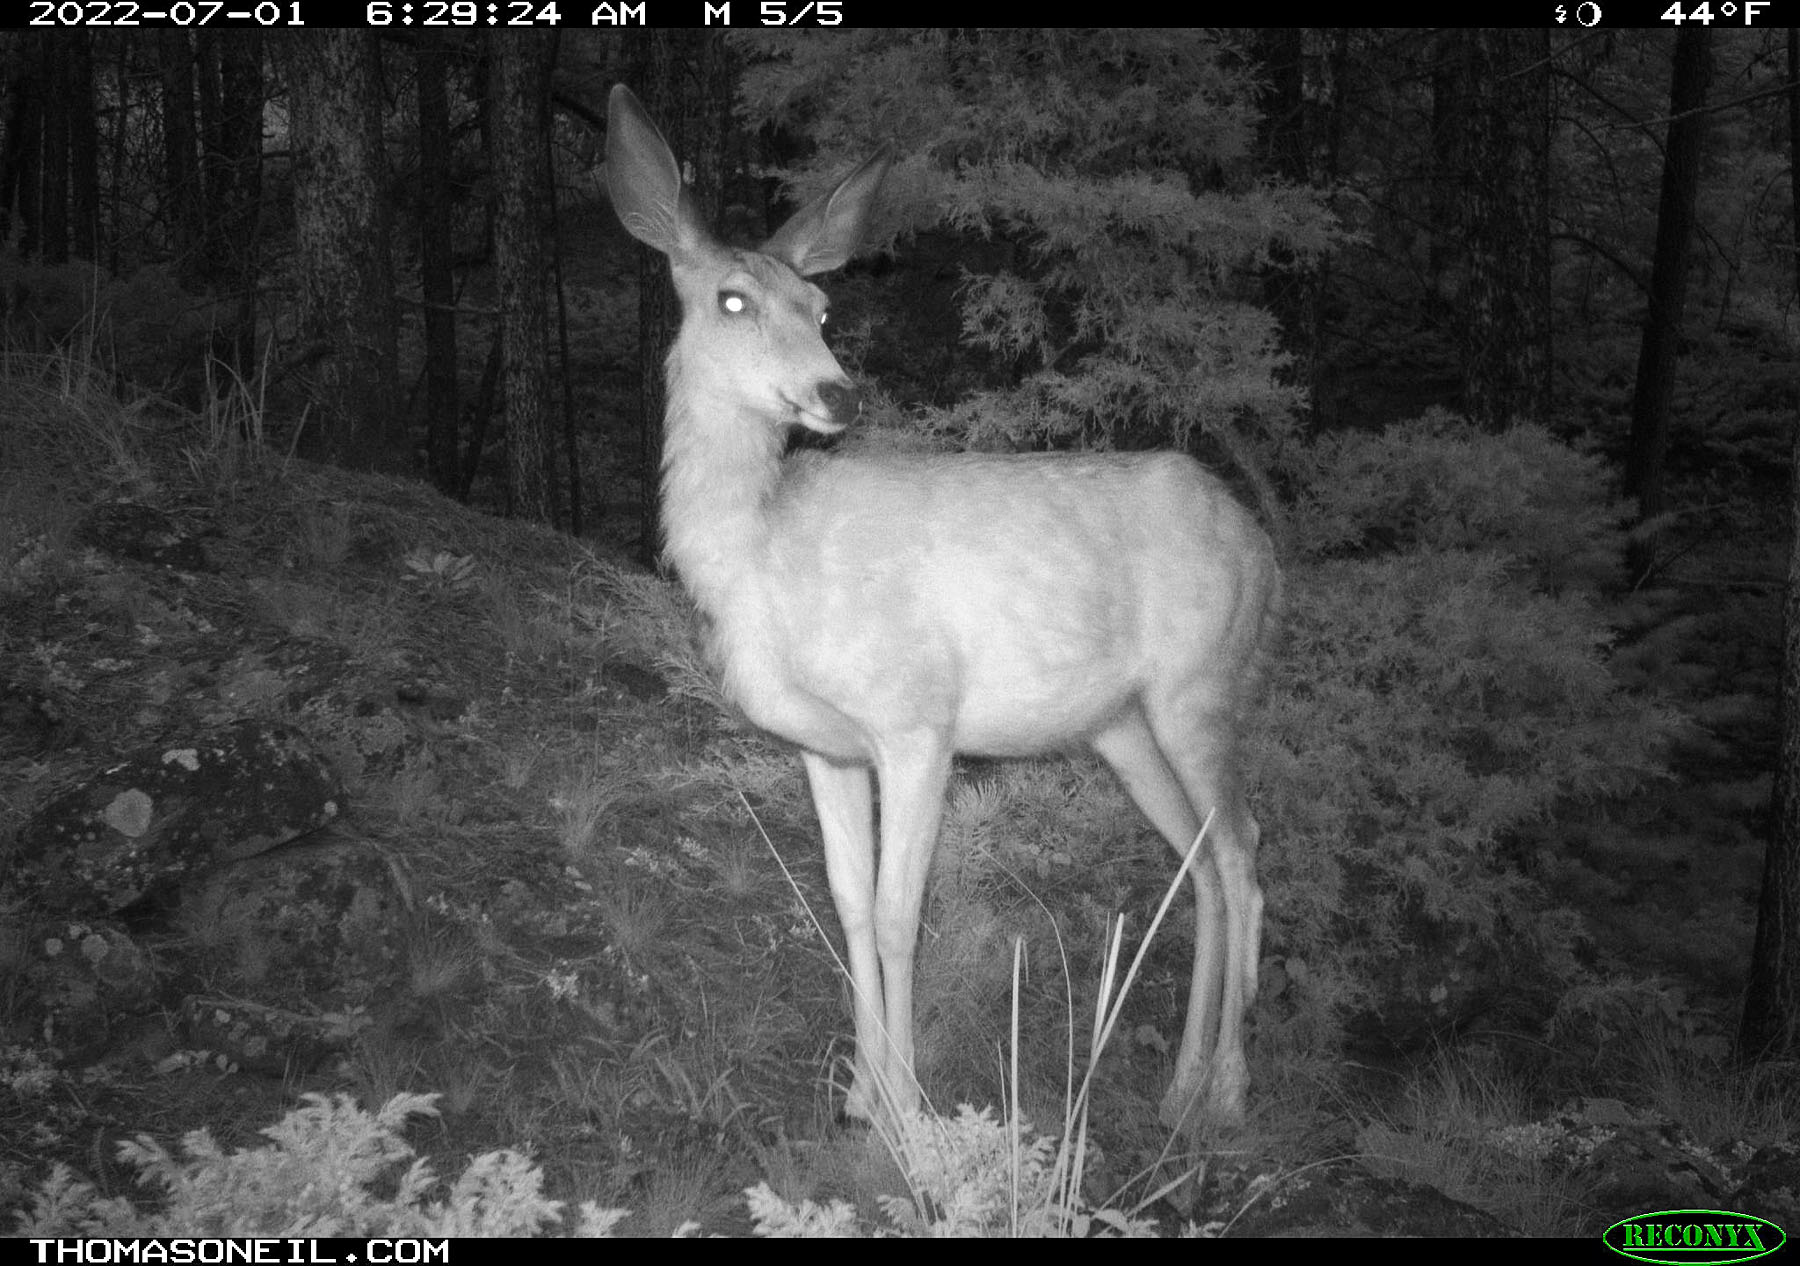 Deer on trailcam near Red Lodge, MT.  Click for next photo.